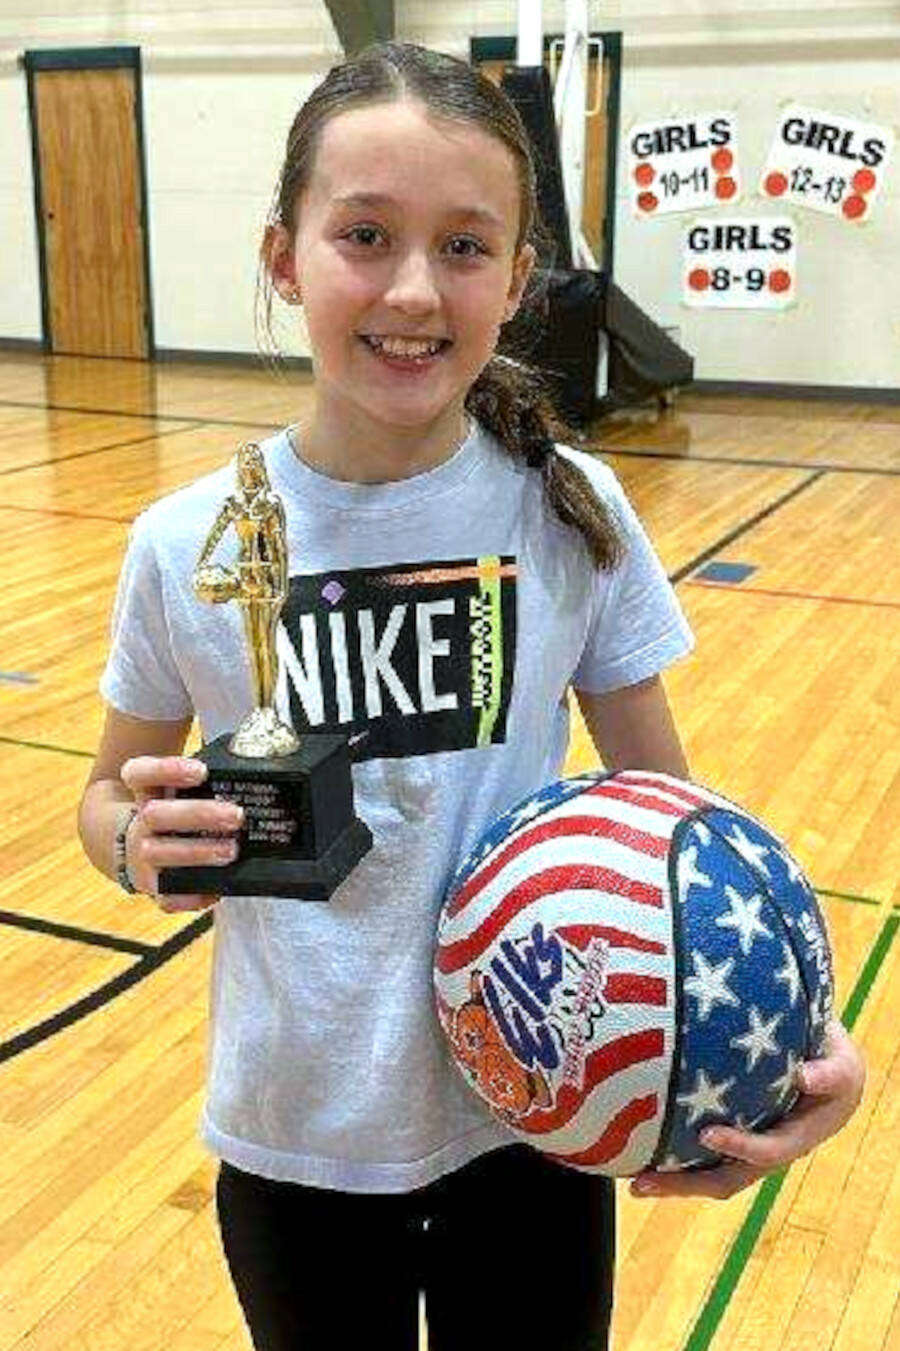 SUBMITTED PHOTO Addisyn Fry of Montesano won the Elks Hoop Shoot district championship in the girls 10-11 division on Saturday in Port Angeles.